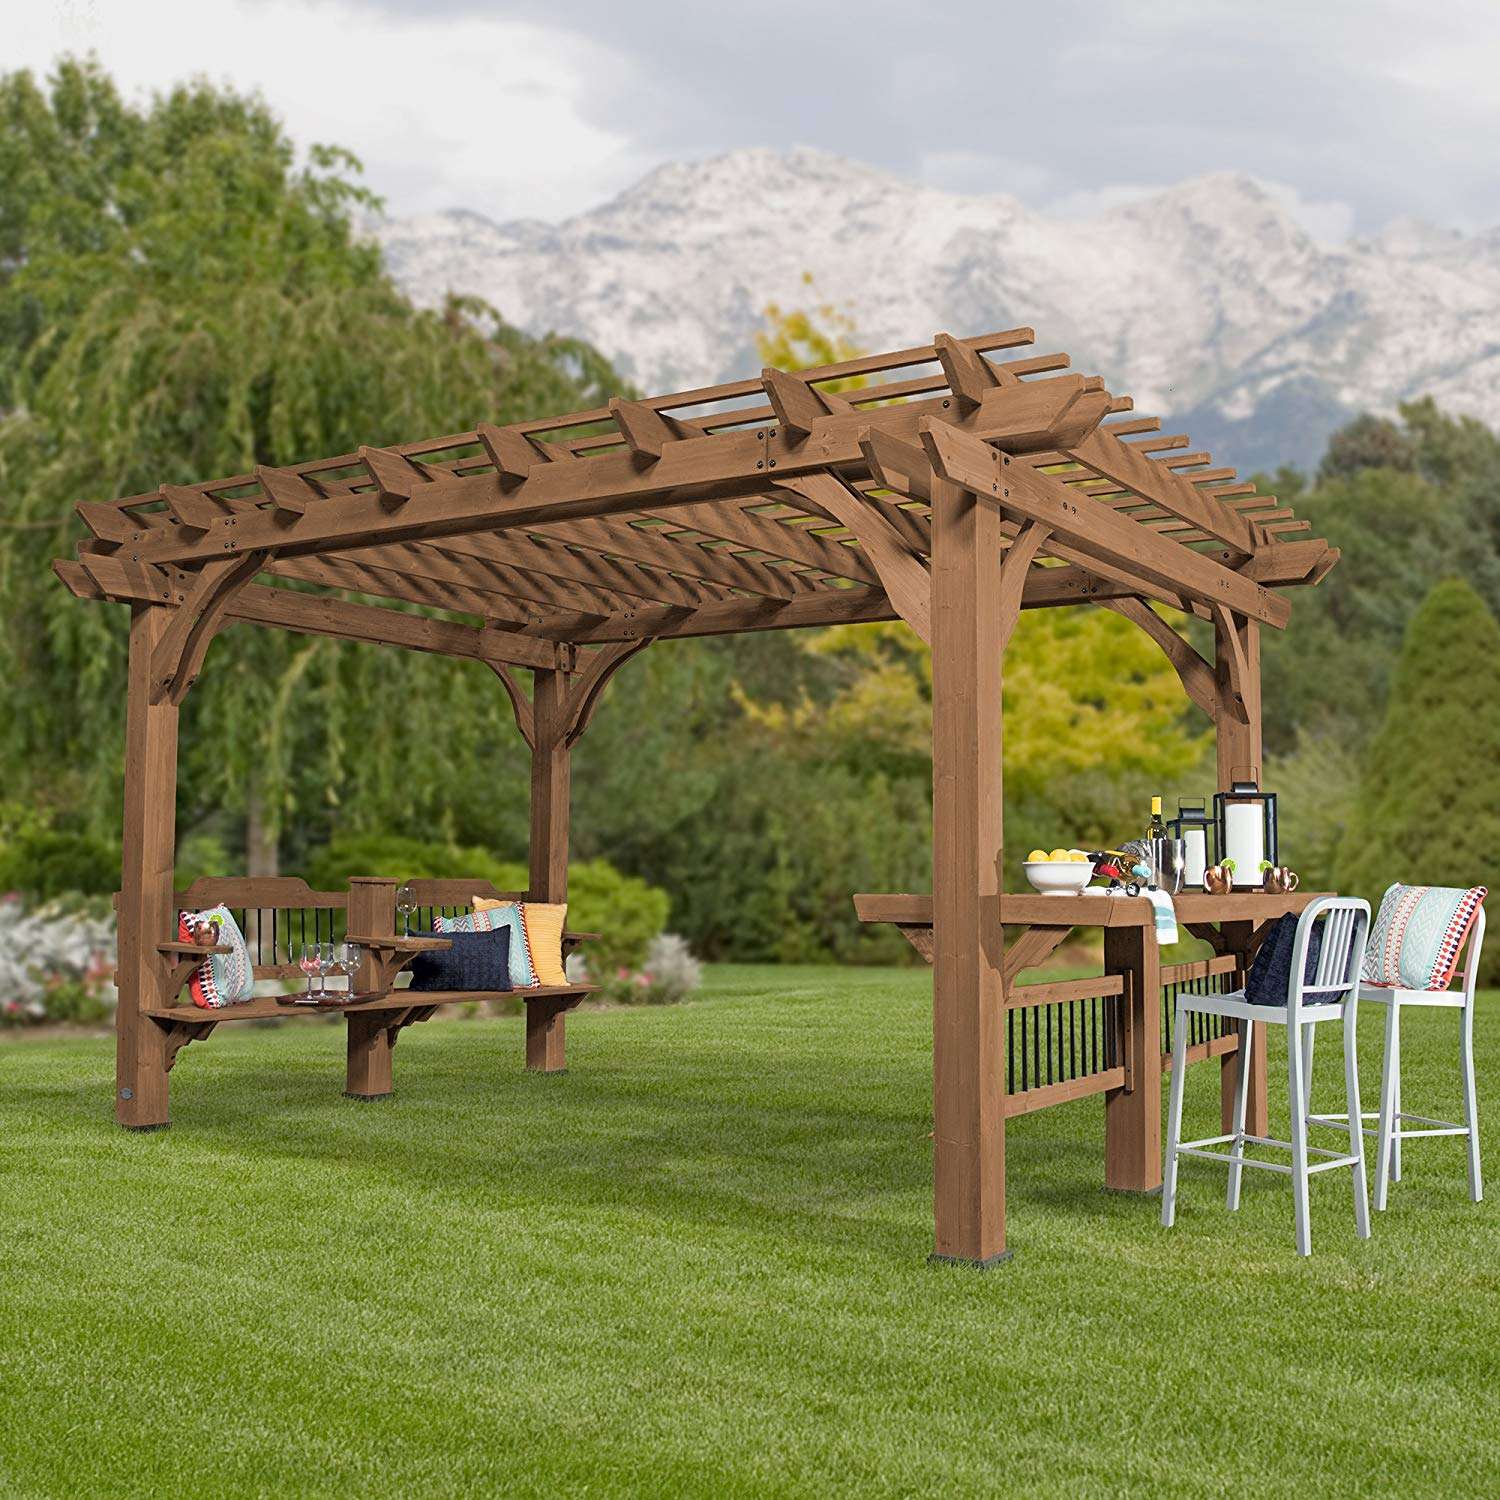 5 Best Wood Pergola Reviews 2020: Complete Buying Guide